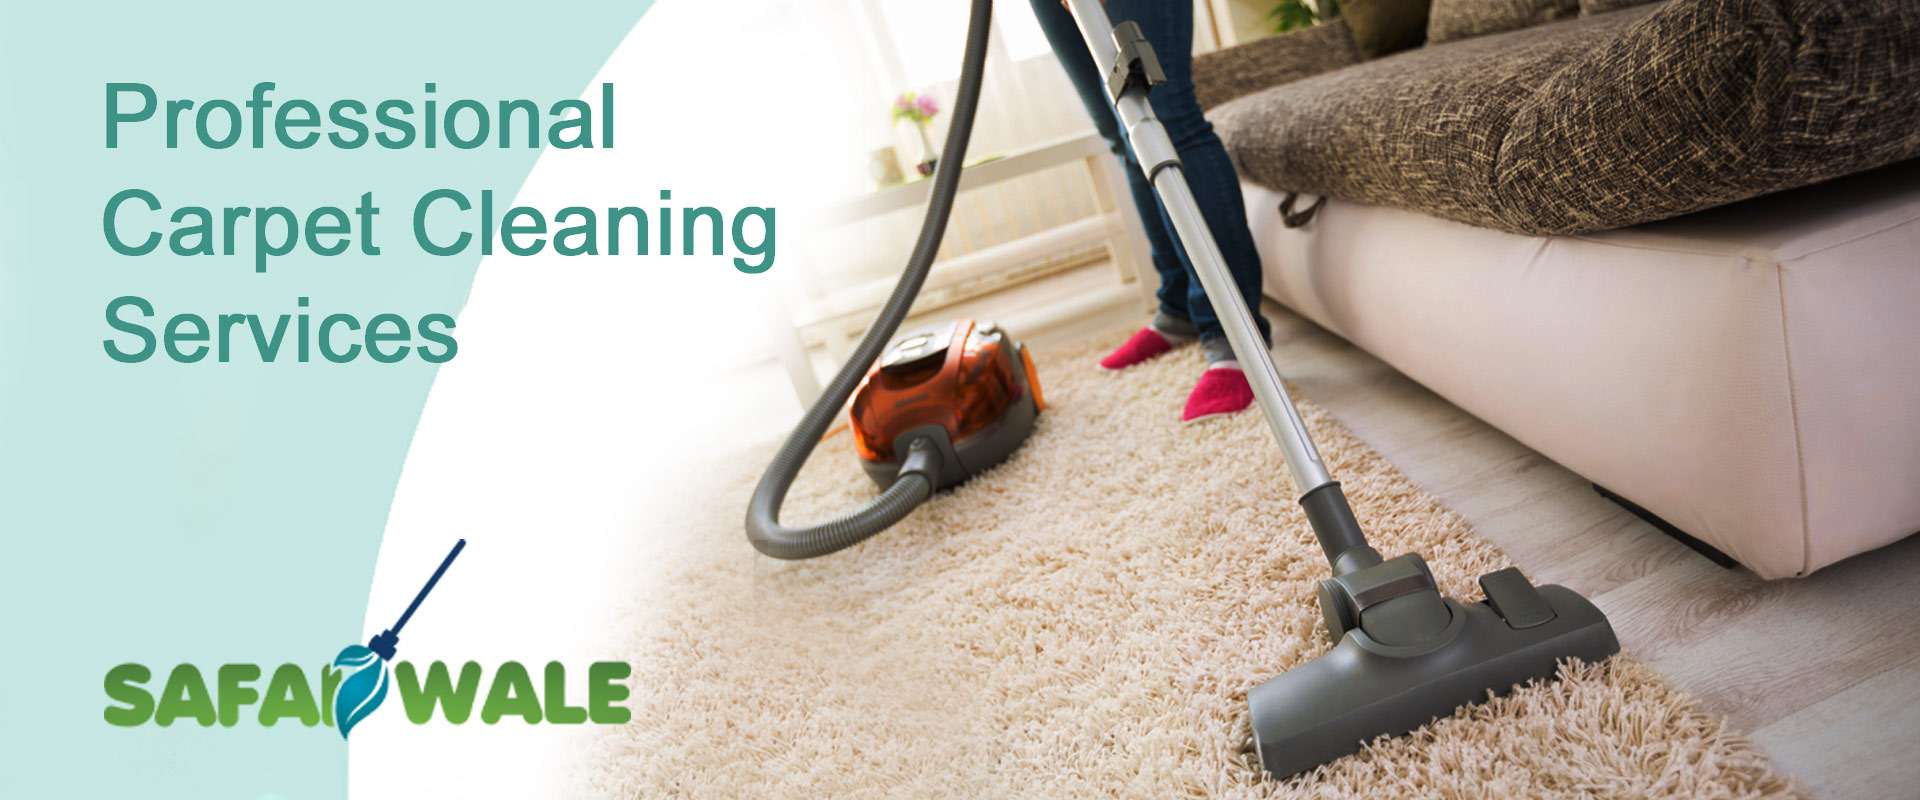 Carpet Cleaning Services In Ram Maruti Road, Thane